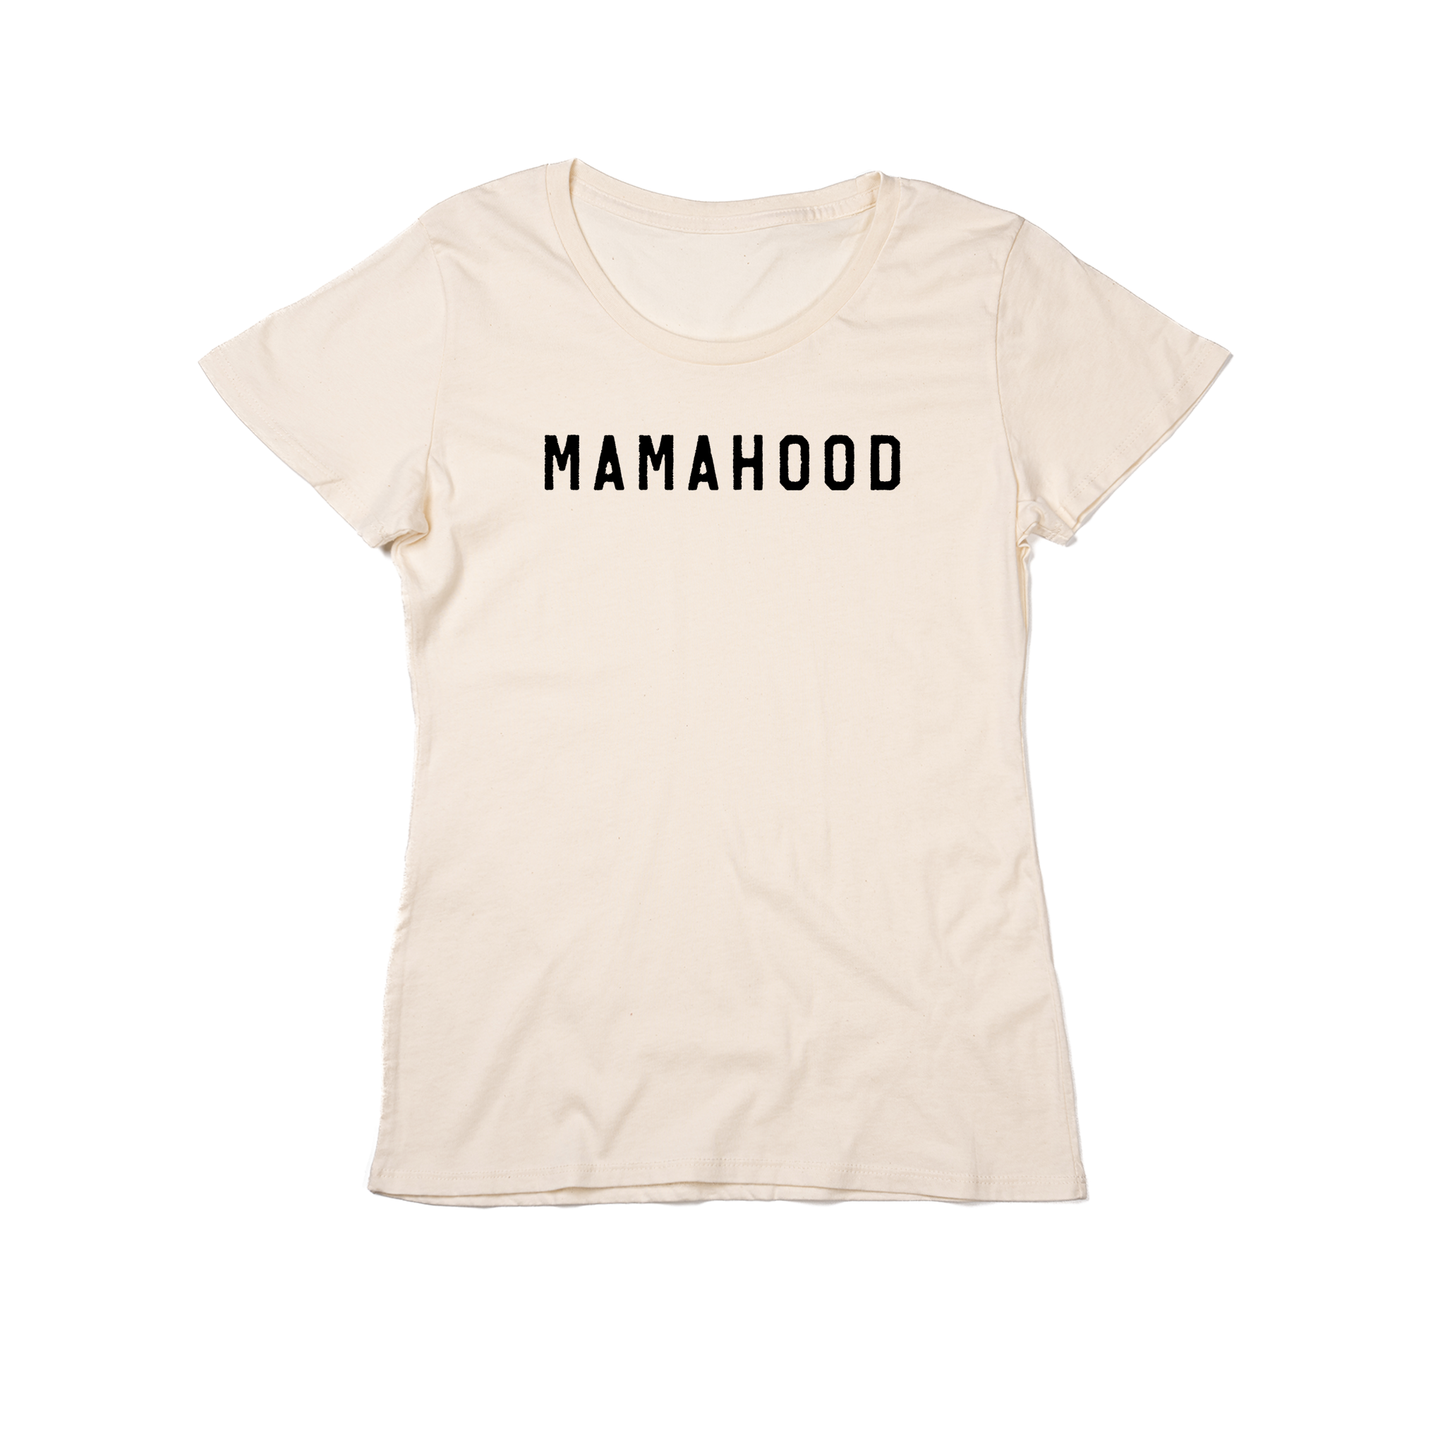 Mamahood (Rough) - Women's Fitted Tee (Natural)